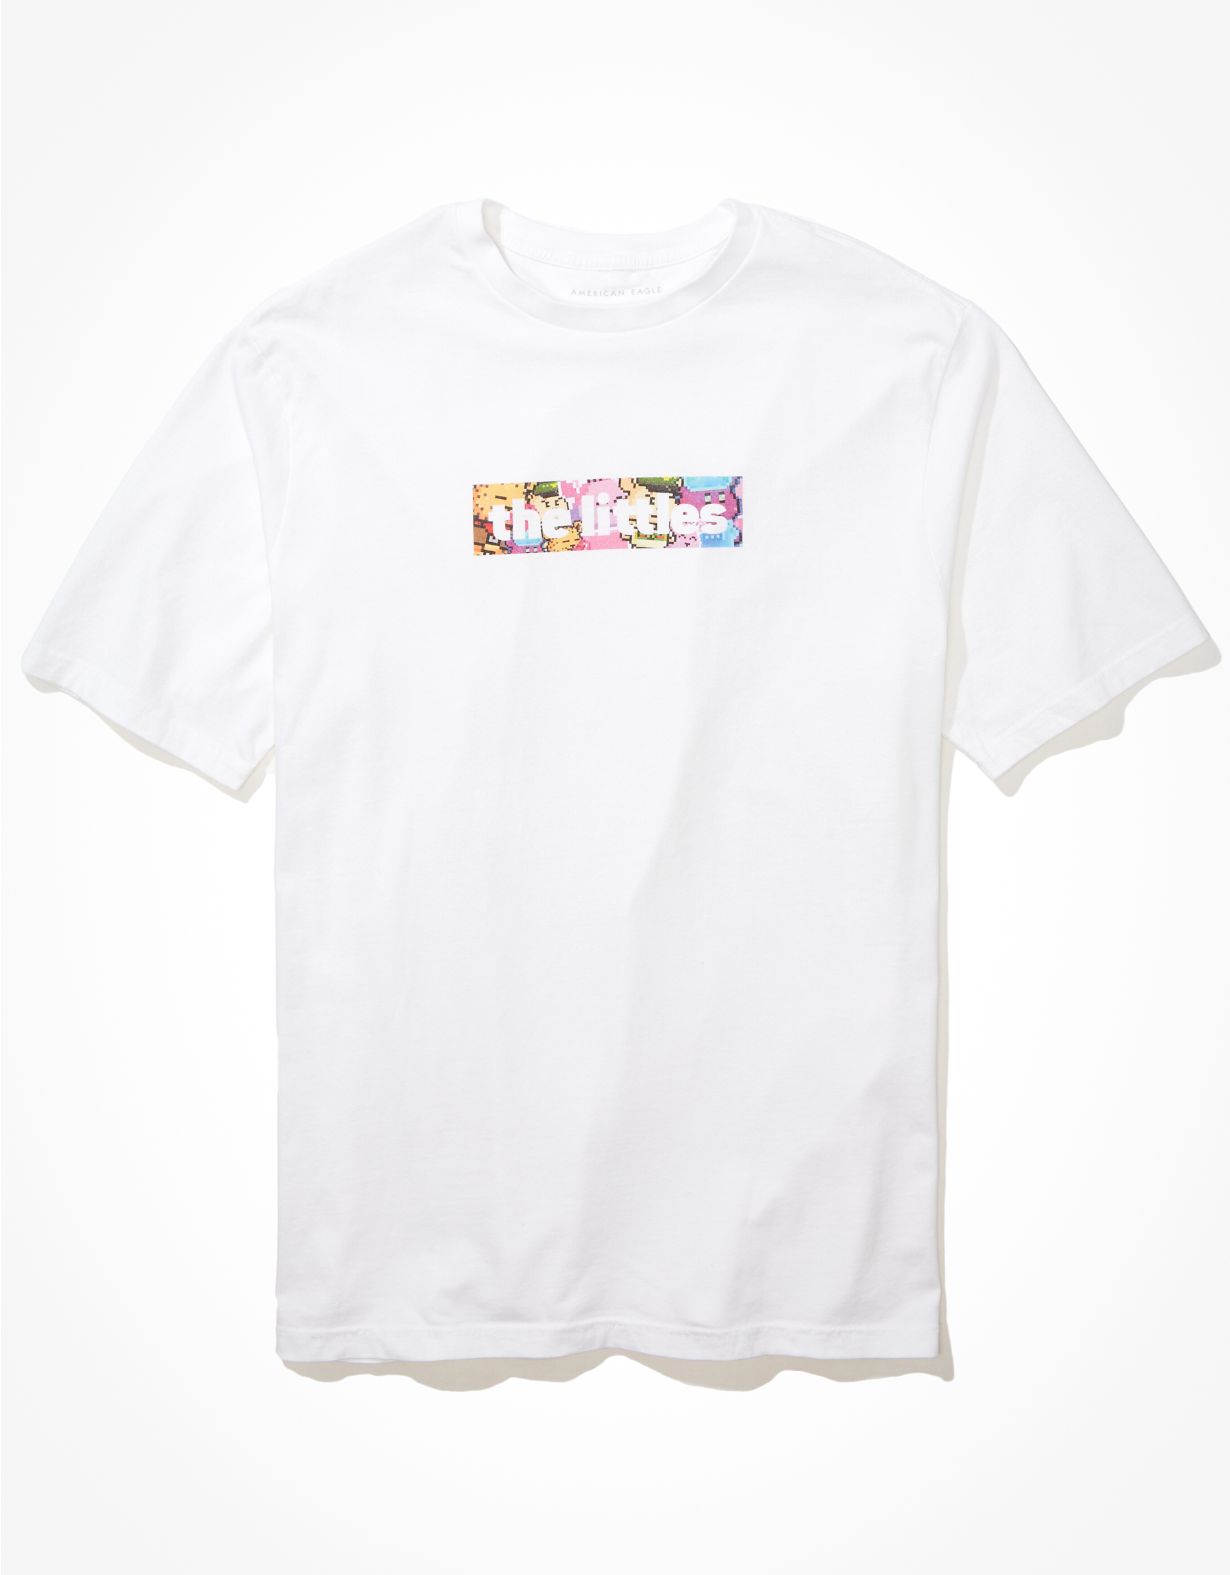 AE x The Littles NFT Graphic T-Shirt